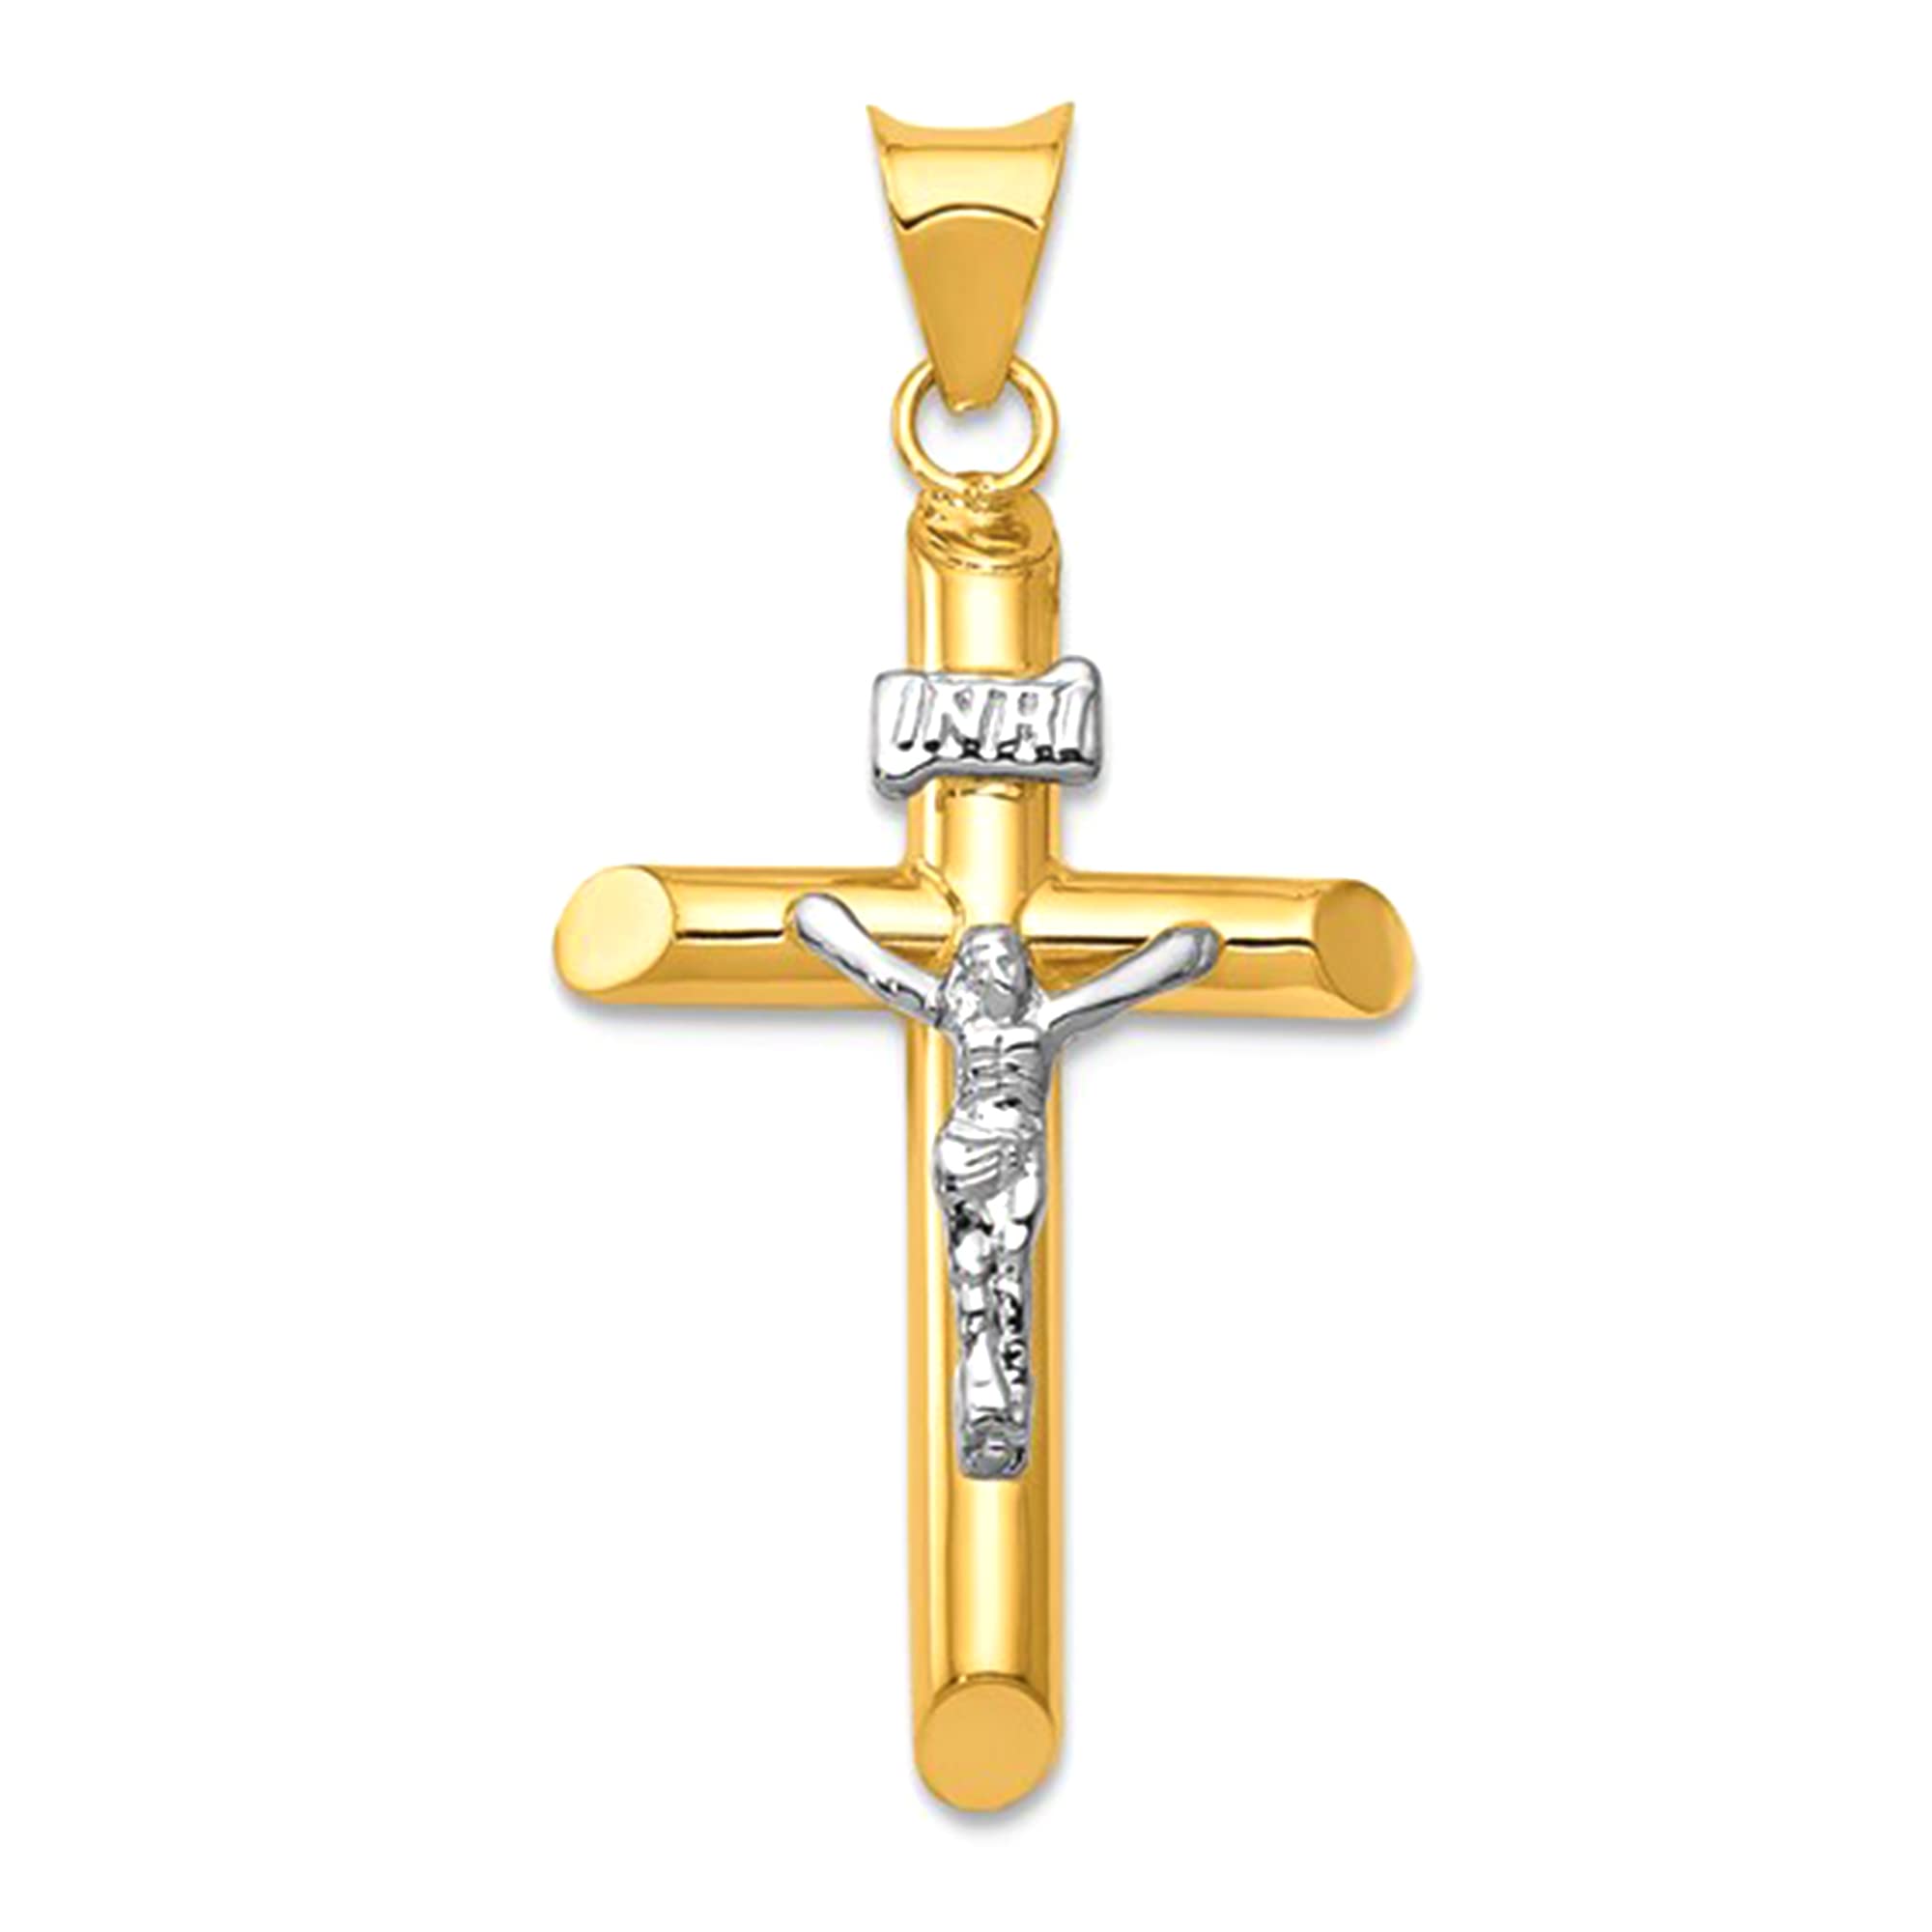 14k Yellow and White Gold Jesus Cross Charm Pendant fine designer jewelry for men and women